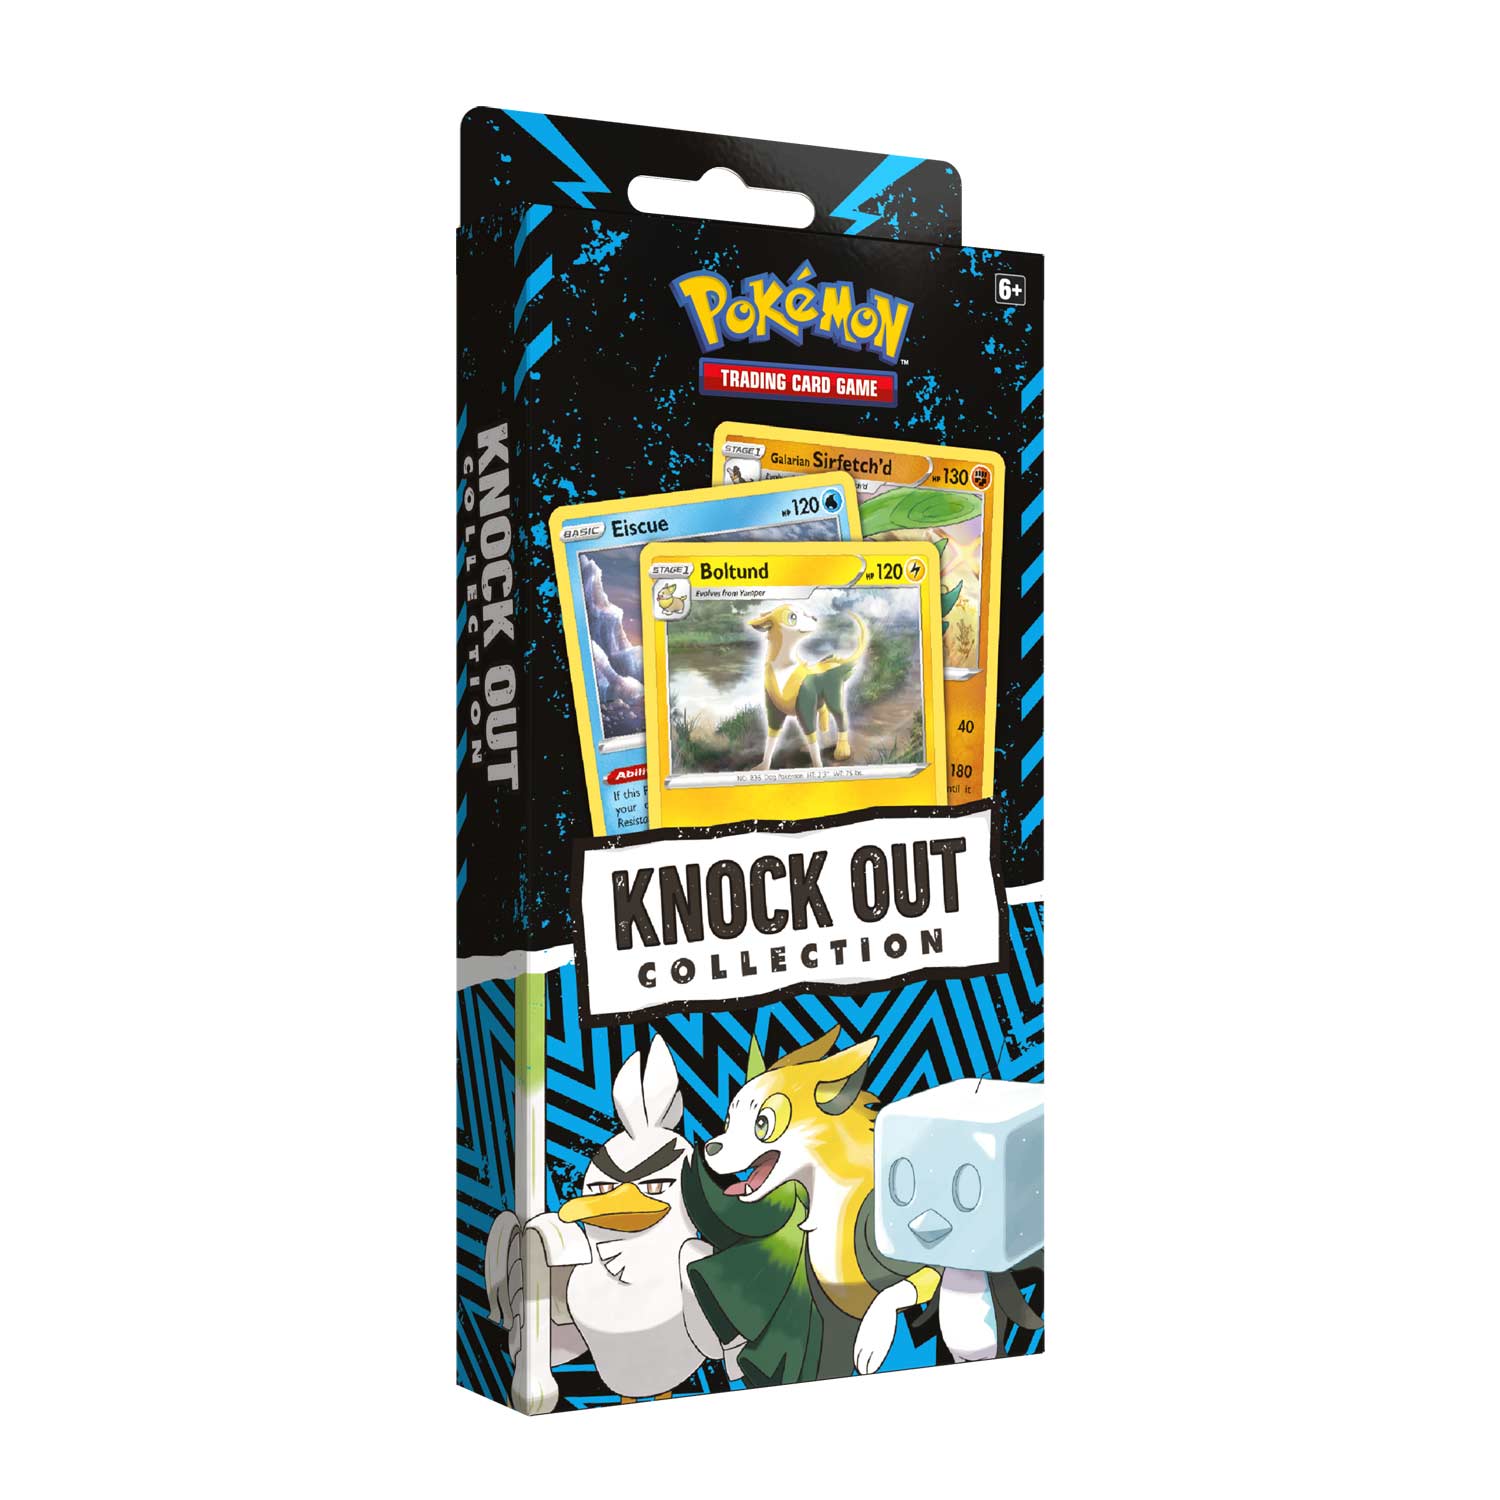 Pokemon TCG Knock Out Collection (Boltund, Eiscue & Sirfetch)